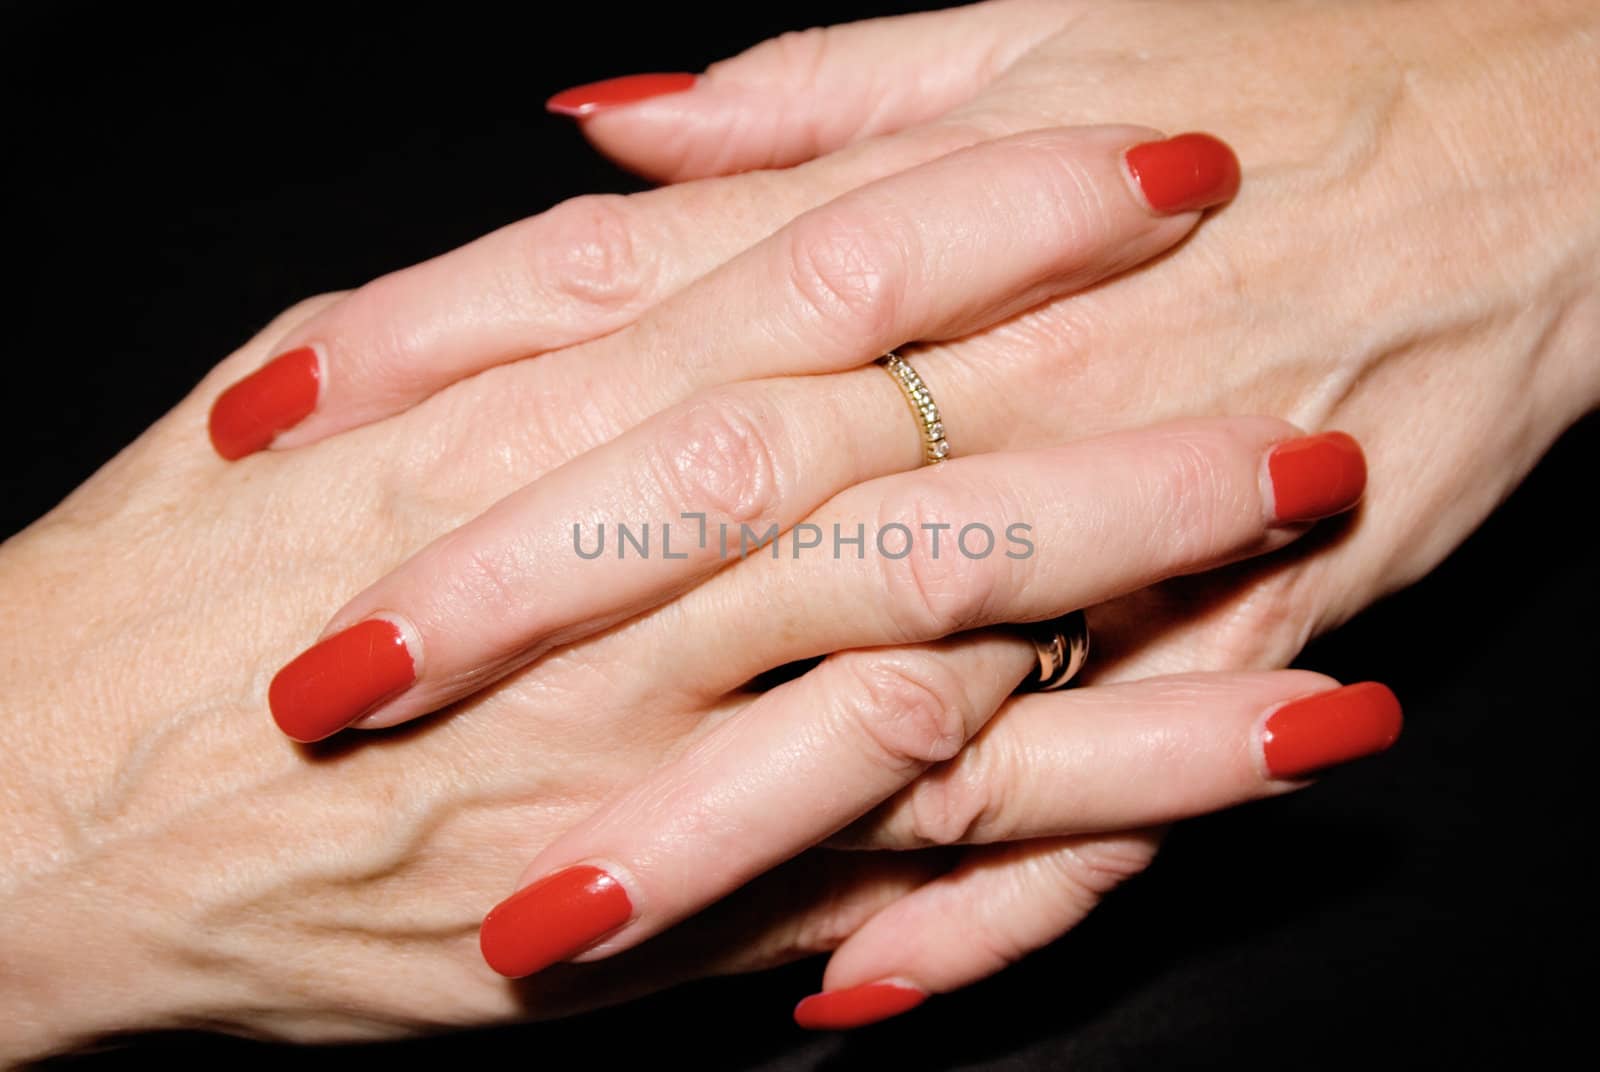 Mature woman with painted fingernails praying. Isolated on a black background.